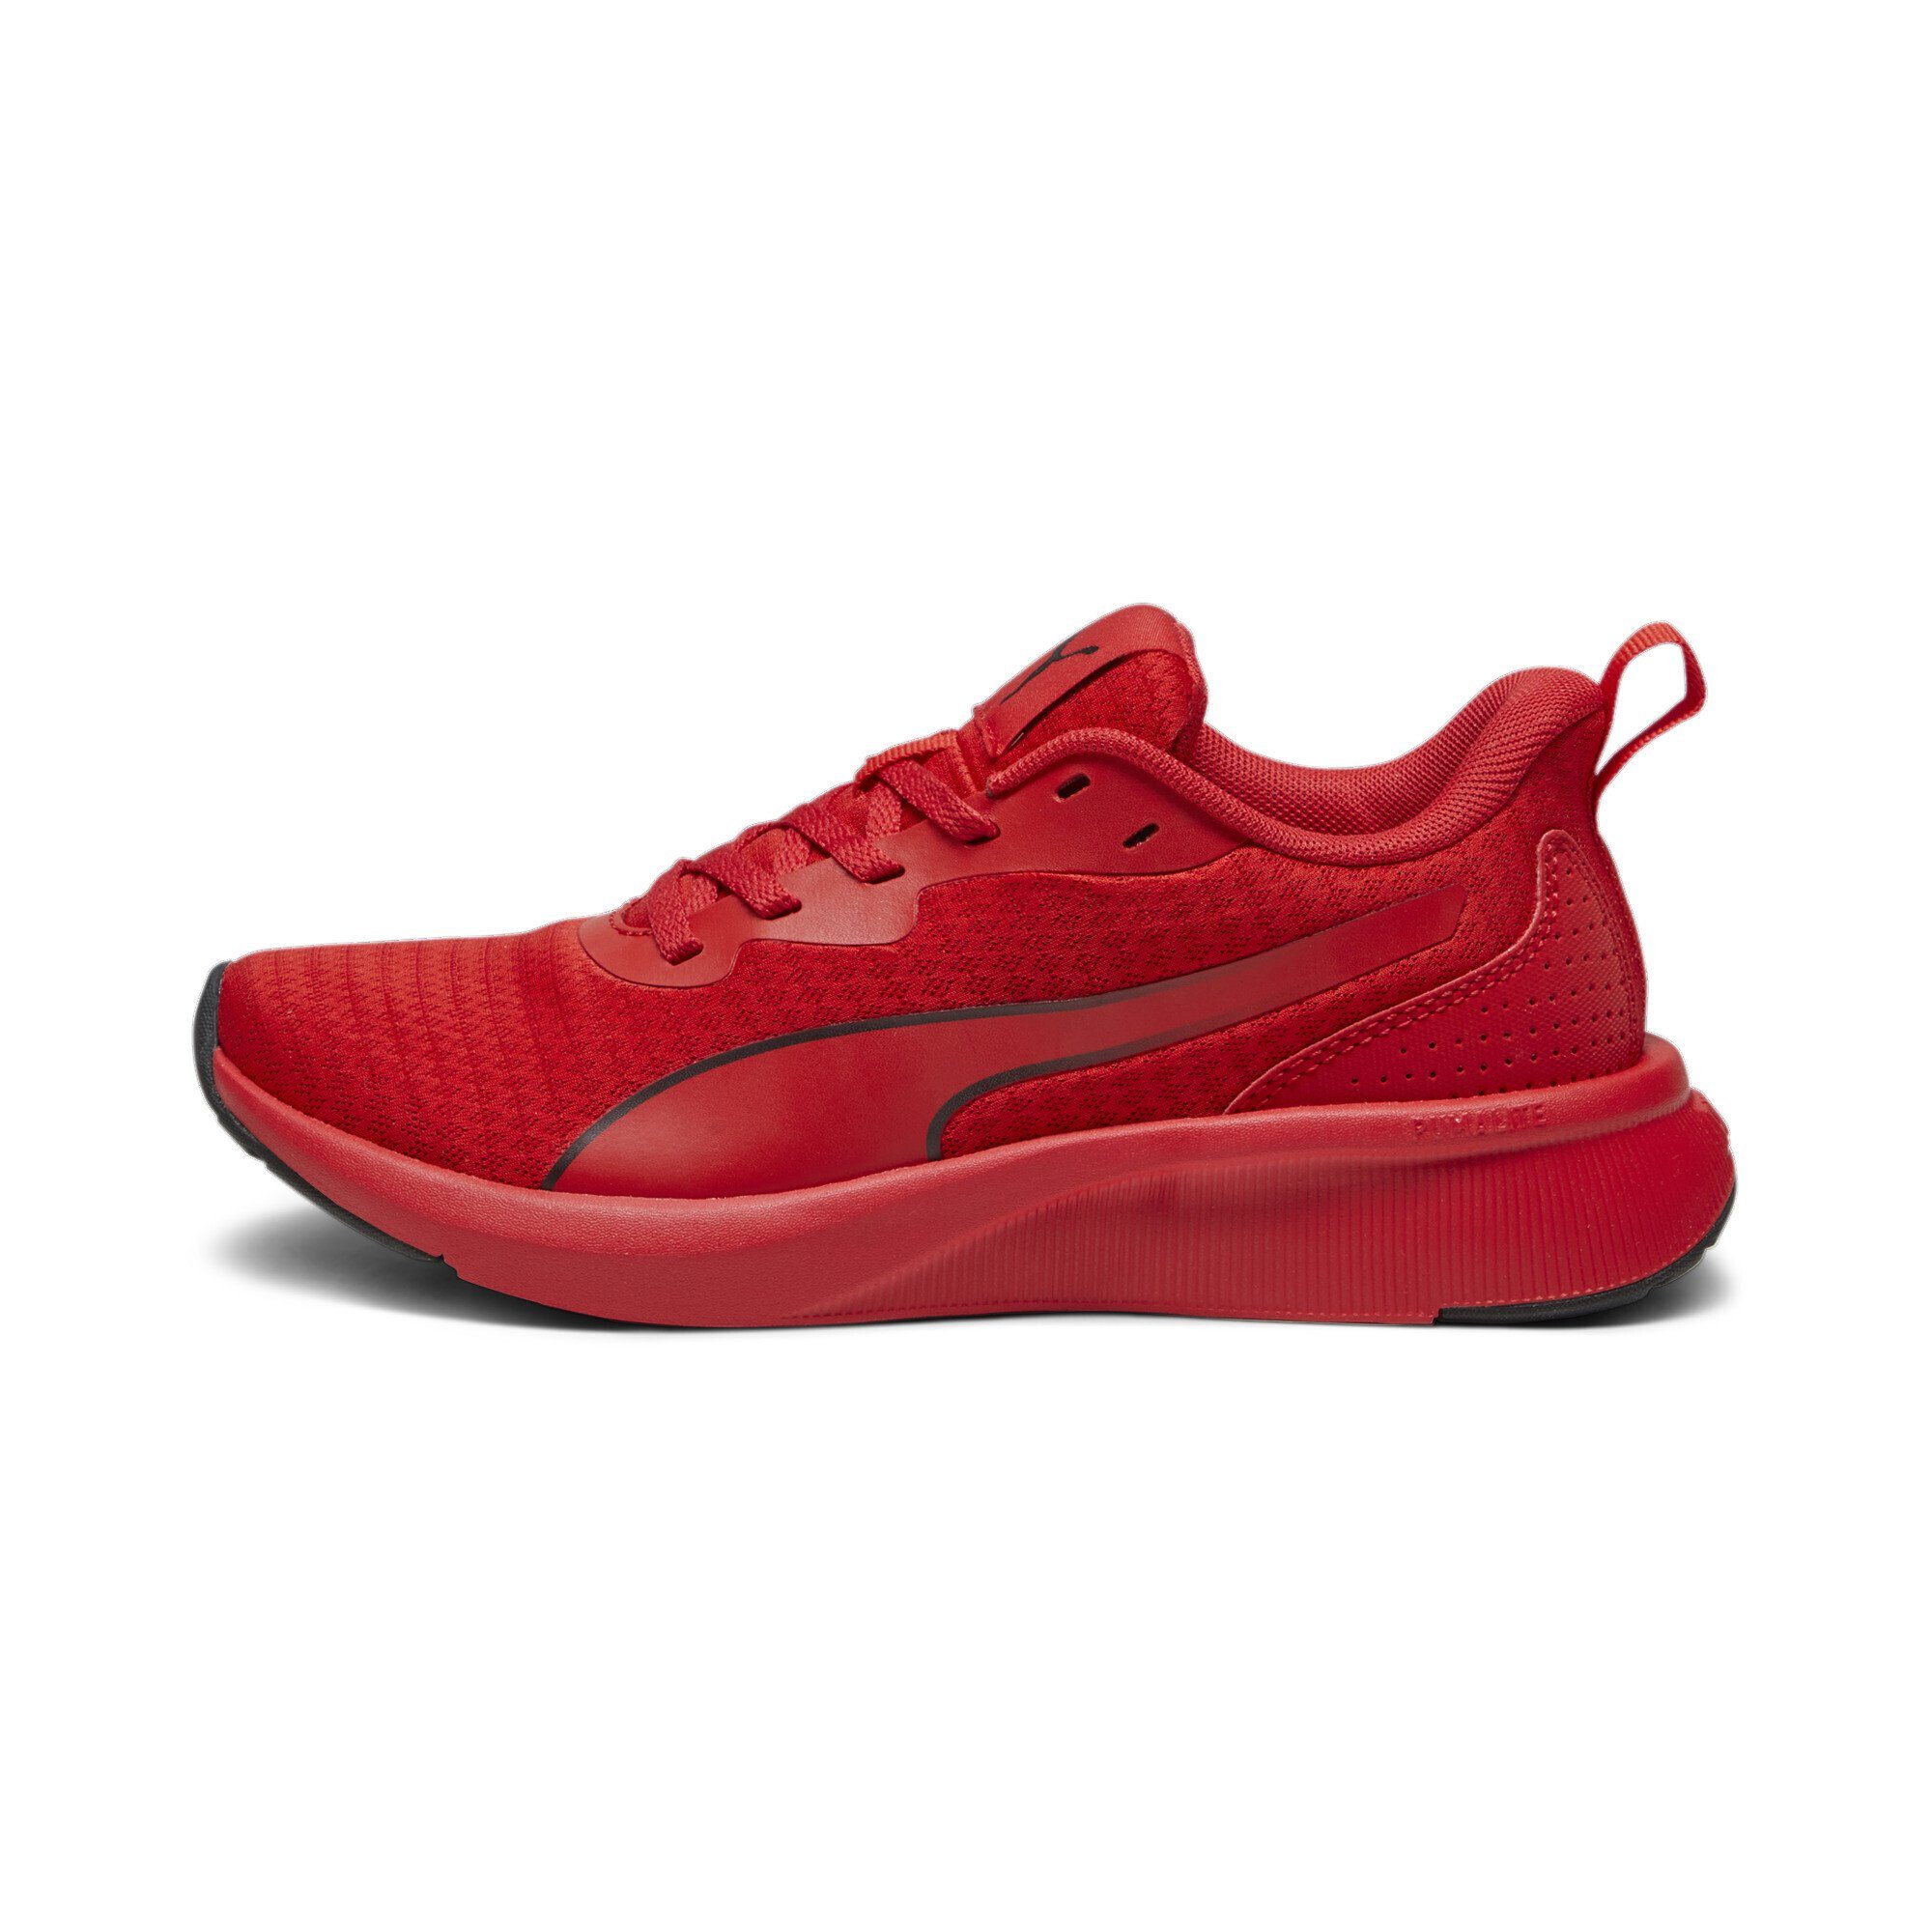 PUMA Flyer Lite Black Trainingsschuh Jugendliche Red Time For Sneakers All